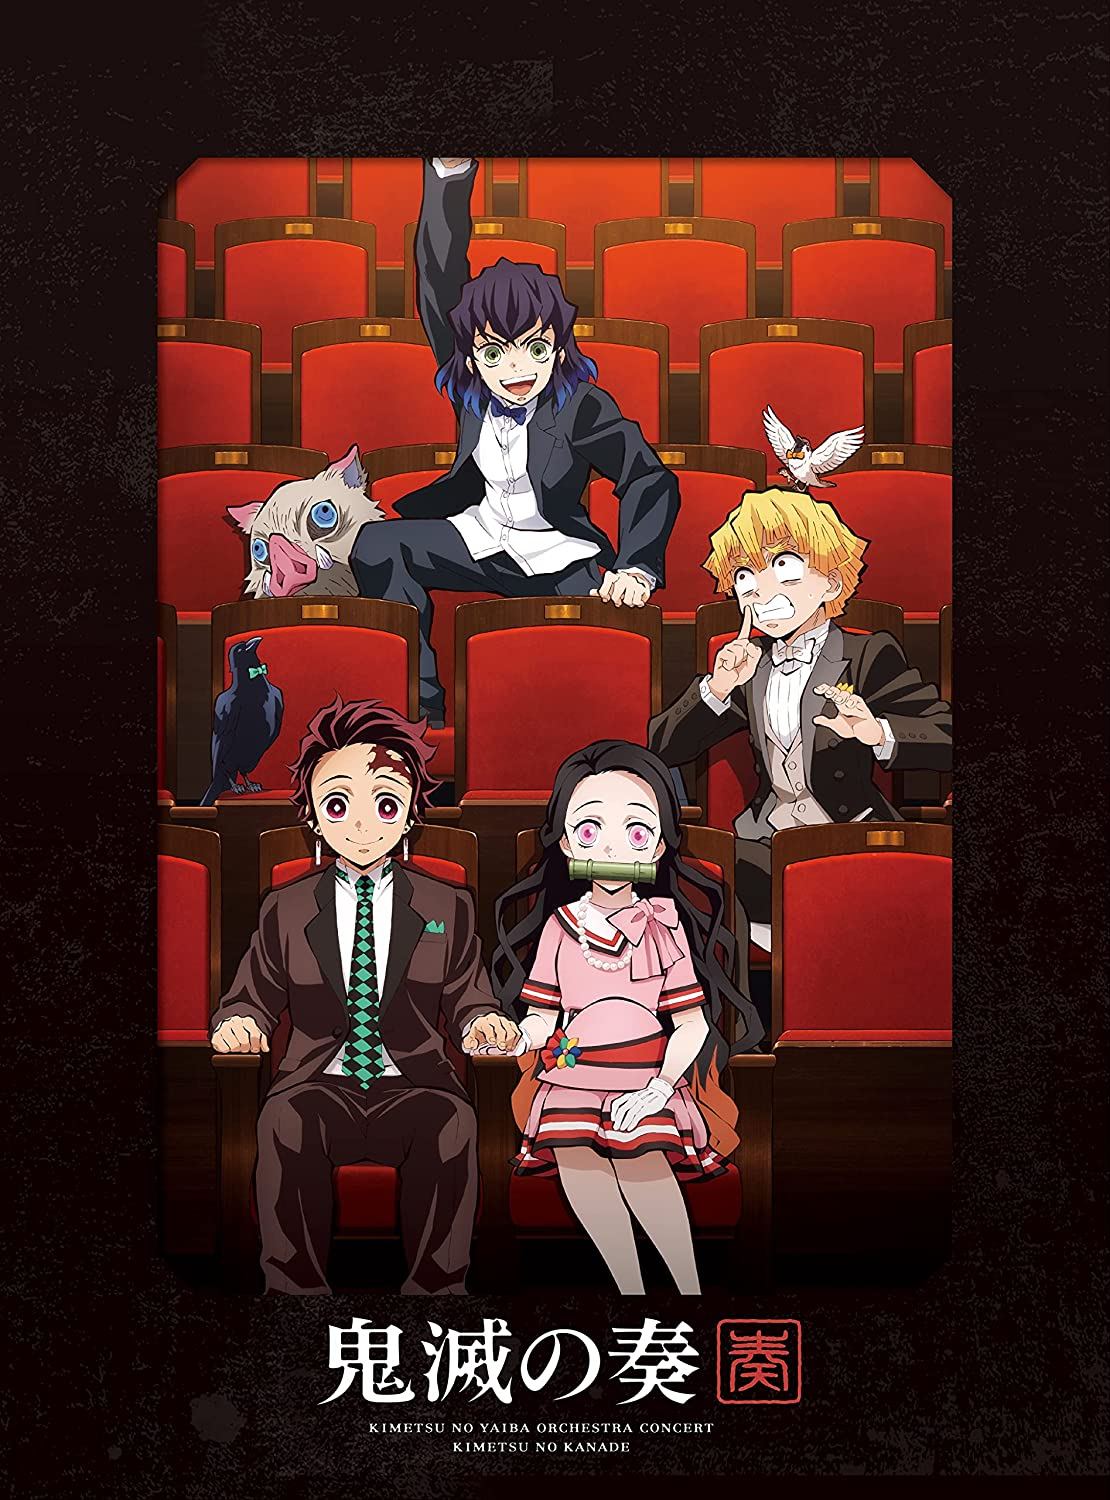 Demon Slayer: Kimetsu no Yaiba - #NEWS Aniplex Online Fest 2022 will open  with an exclusive 20-minute performance from the Demon Slayer: Kimetsu no  Yaiba Orchestra Concert accompanied by scenes from the